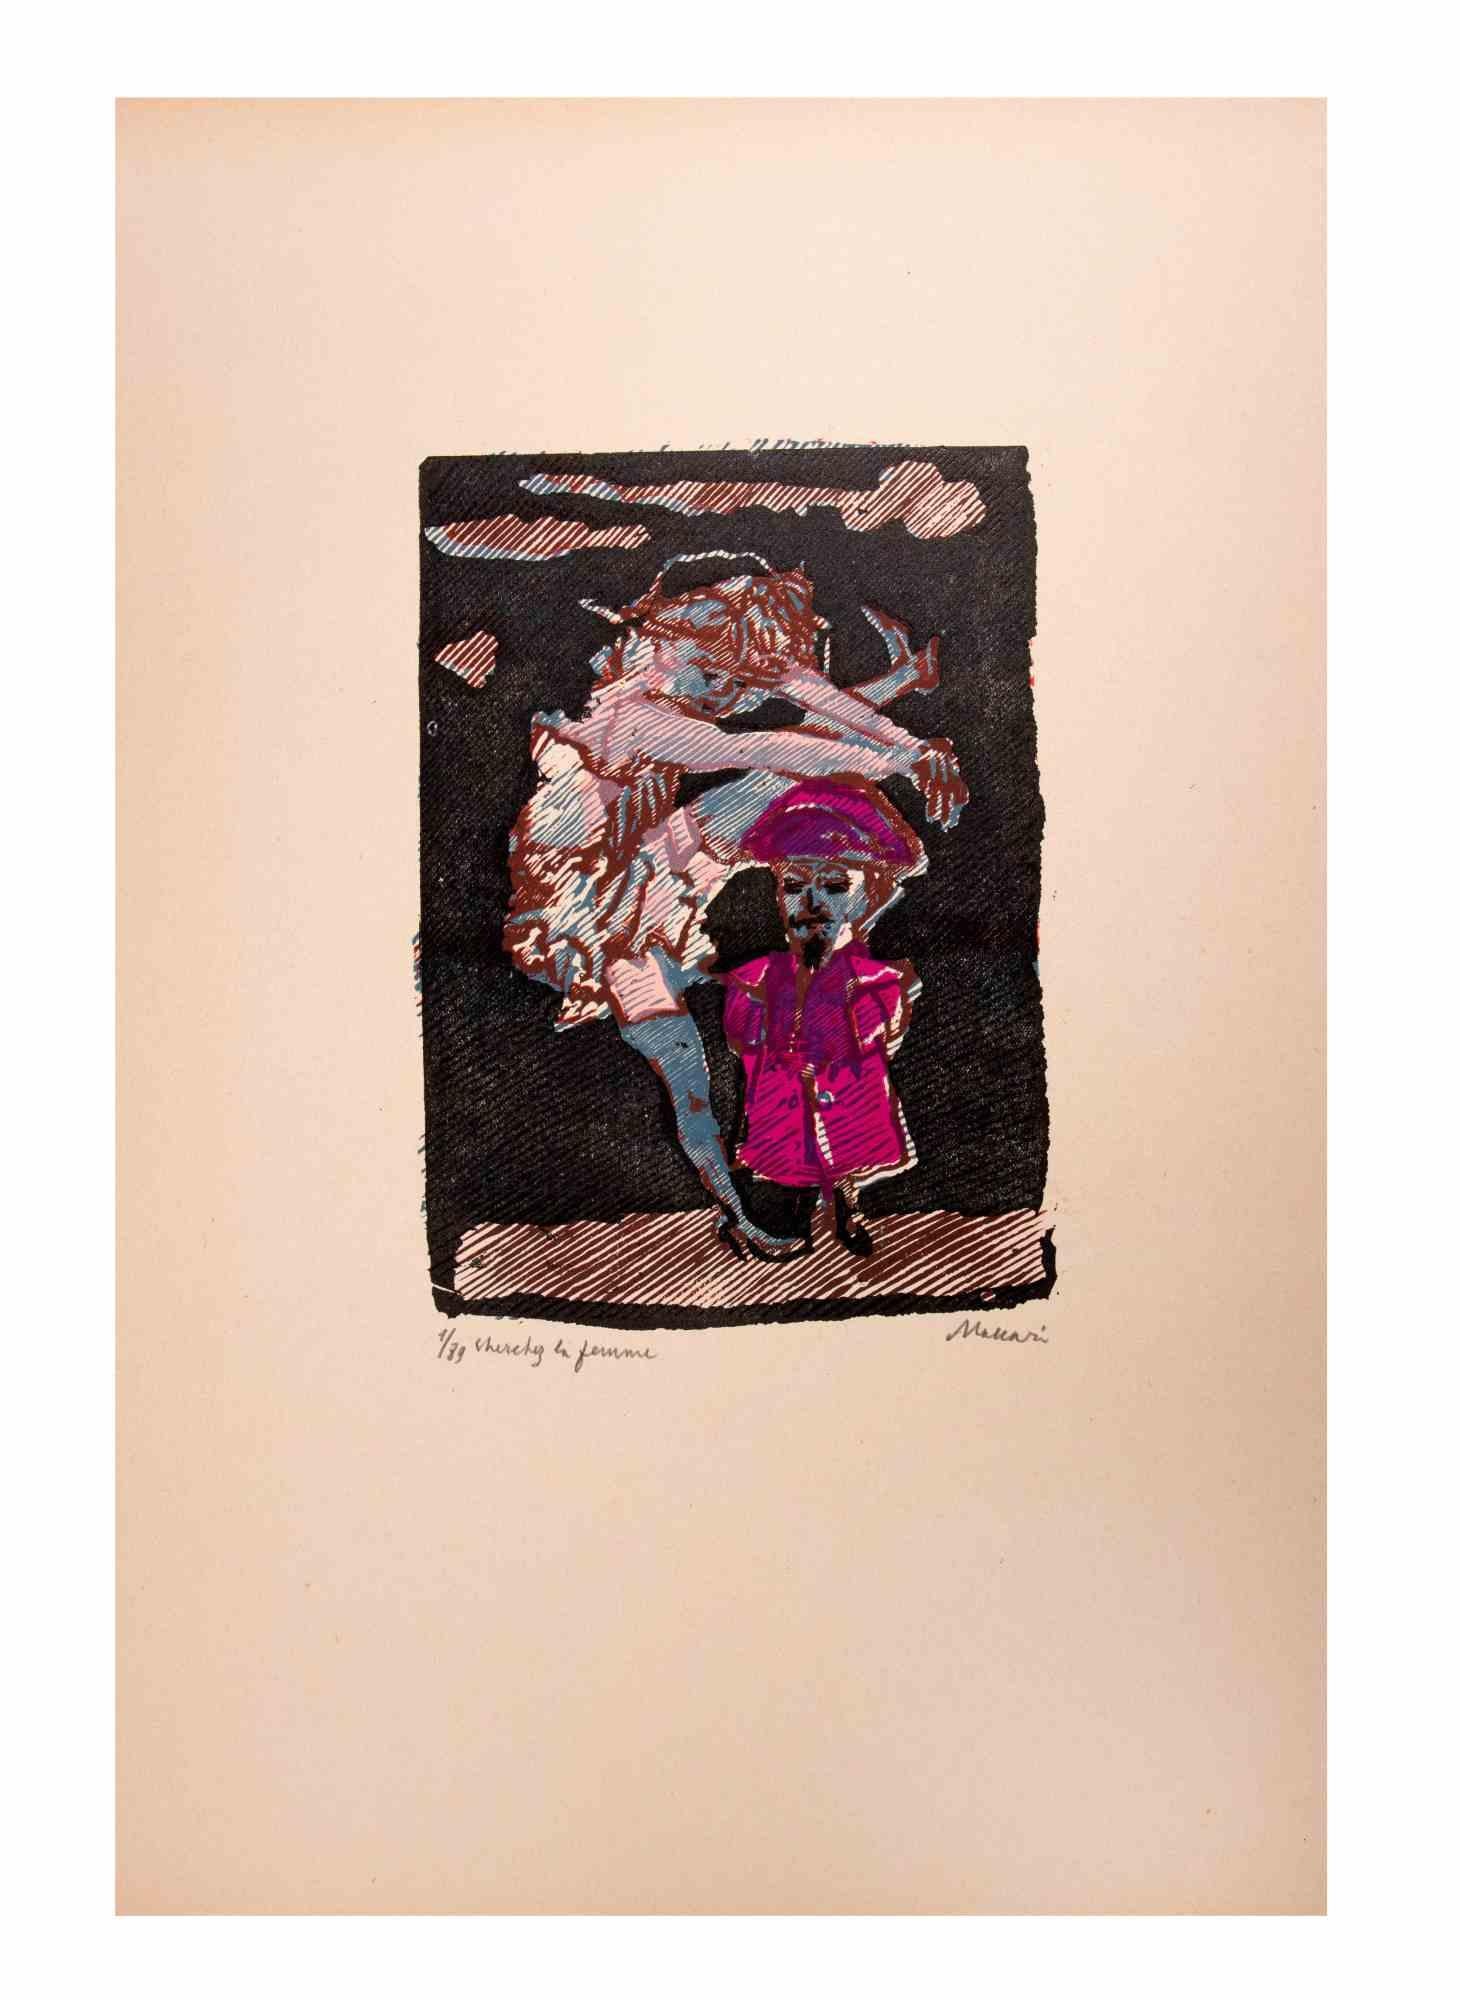 La Femme is an Artwork realized by Mino Maccari  (1924-1989) in the Mid-20th Century.

Colored woodcut on paper. Hand-signed on the lower, numbered 1/89 specimens and titled on the left margin.

Good conditions.

Mino Maccari (Siena, 1924-Rome, June